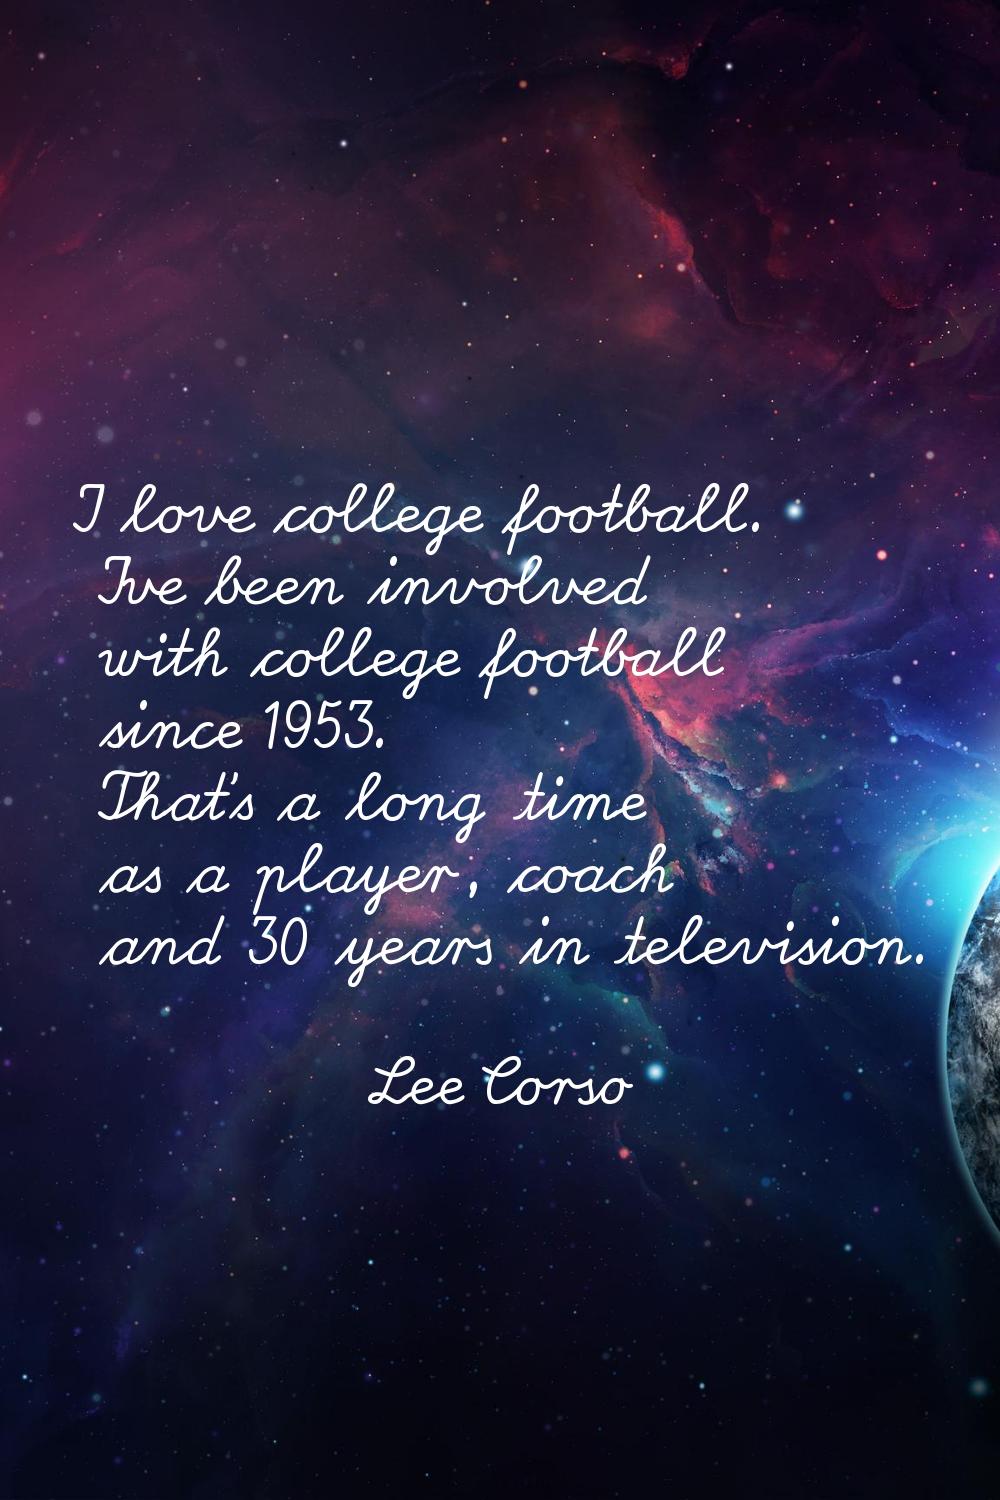 I love college football. I've been involved with college football since 1953. That's a long time as